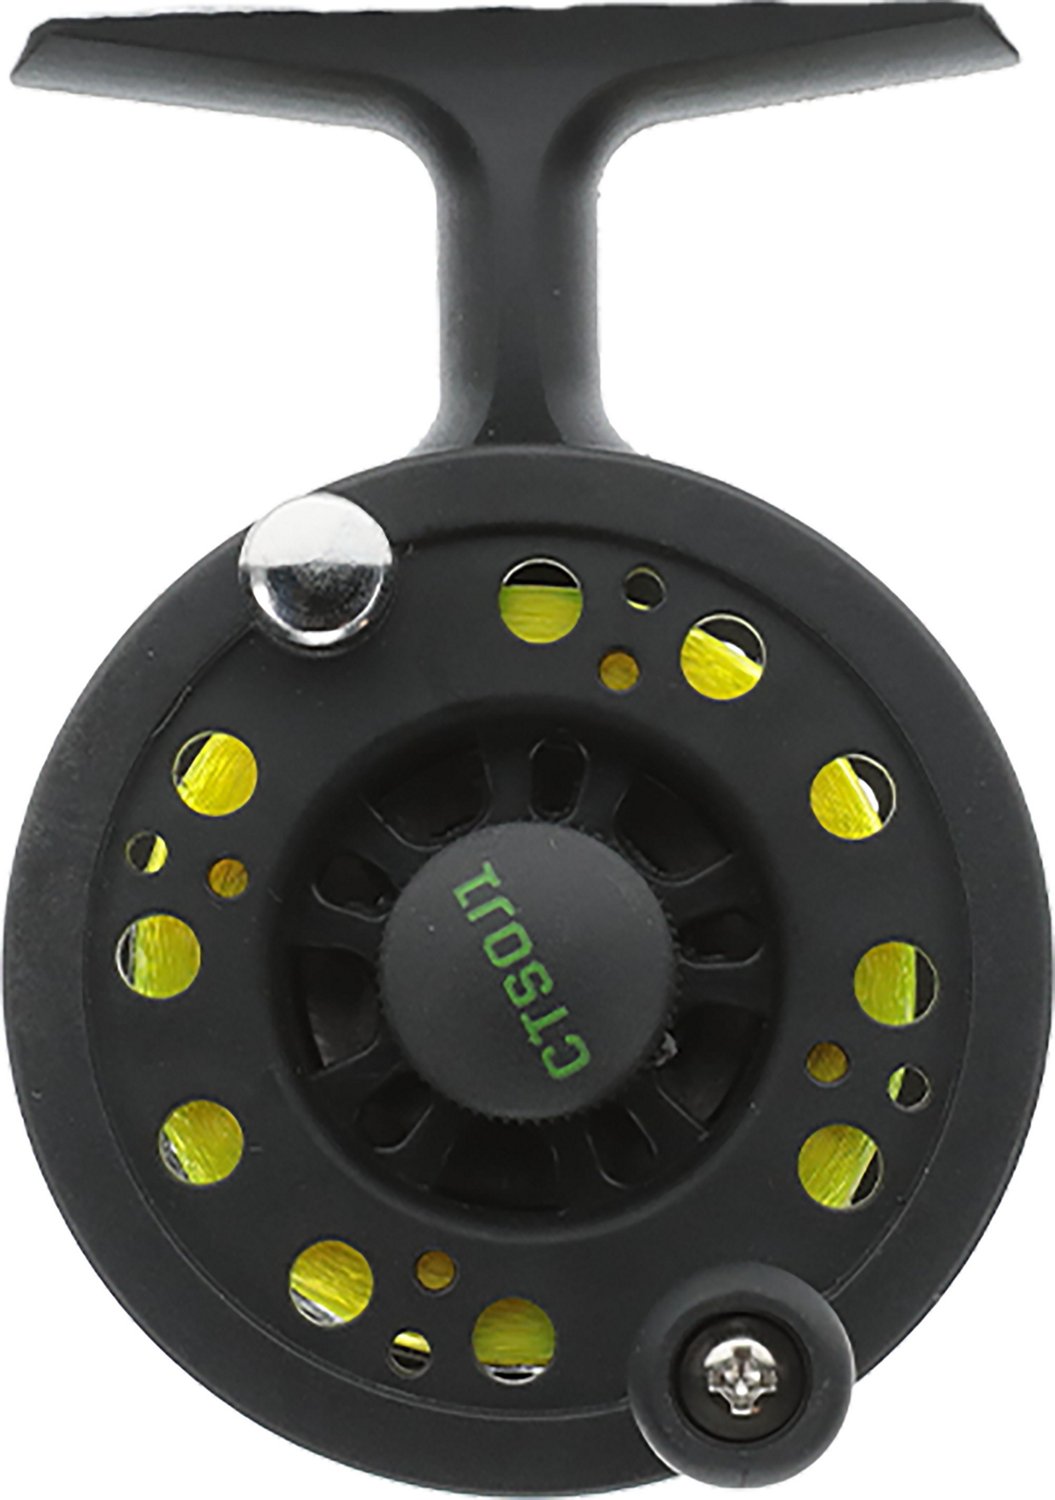 Crappie Thunder Solo Jig Reel